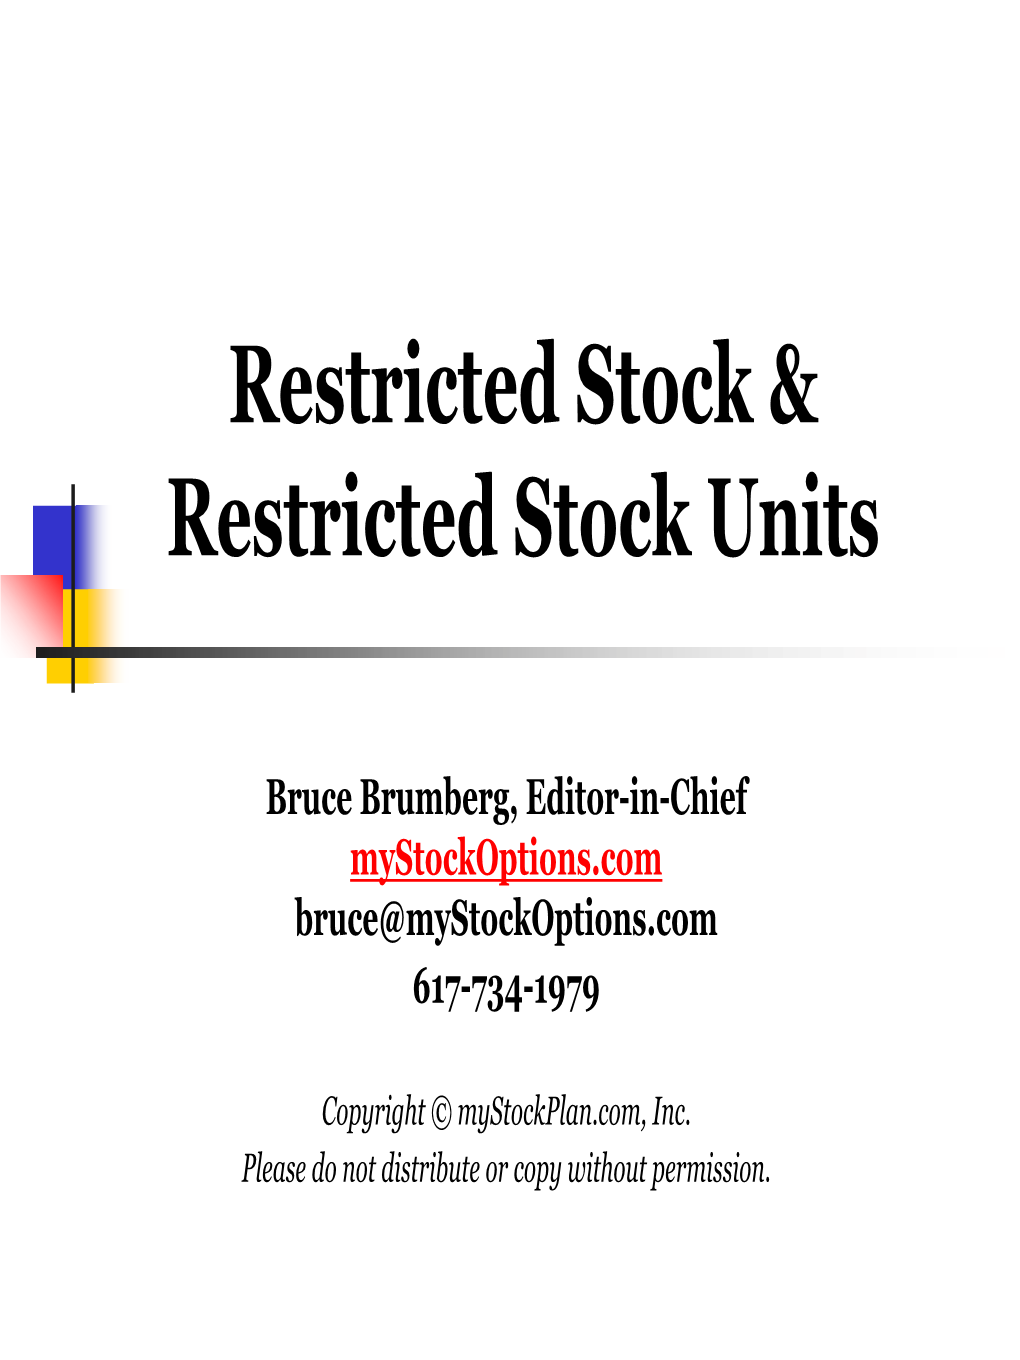 Restricted Stock & Restricted Stock Units